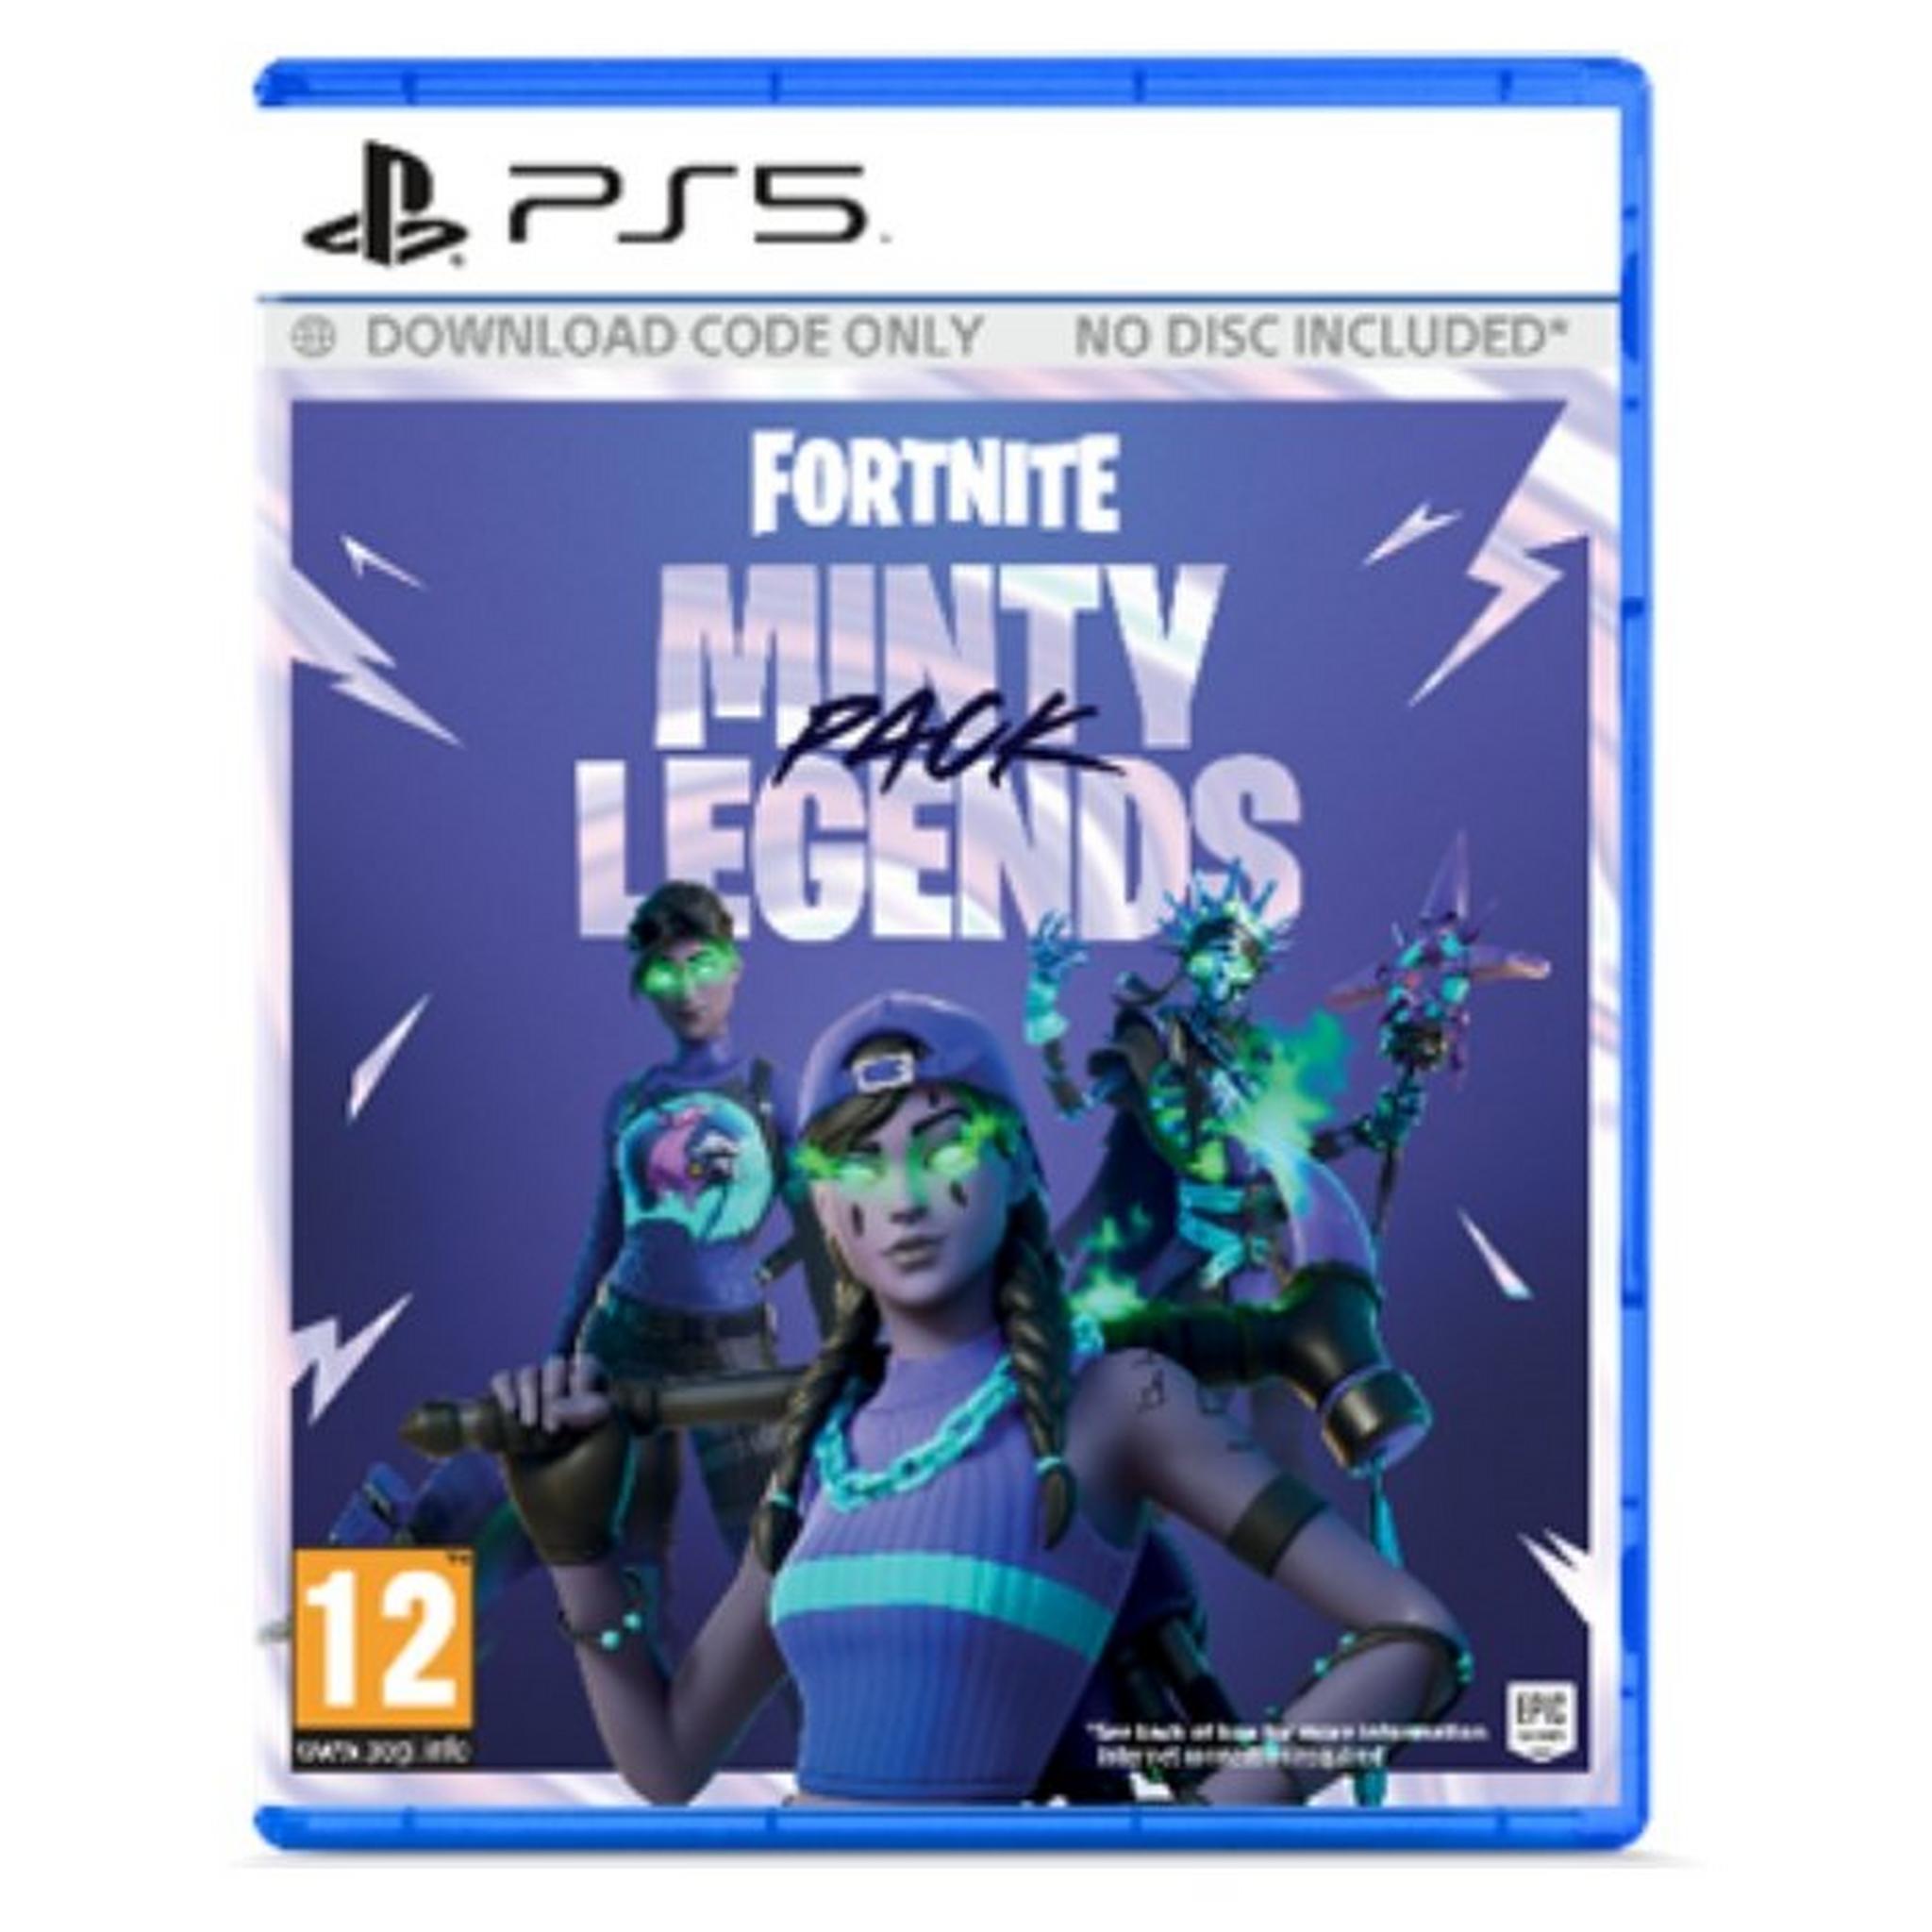 Fortnite Minty Legends Pack - PS5 Game